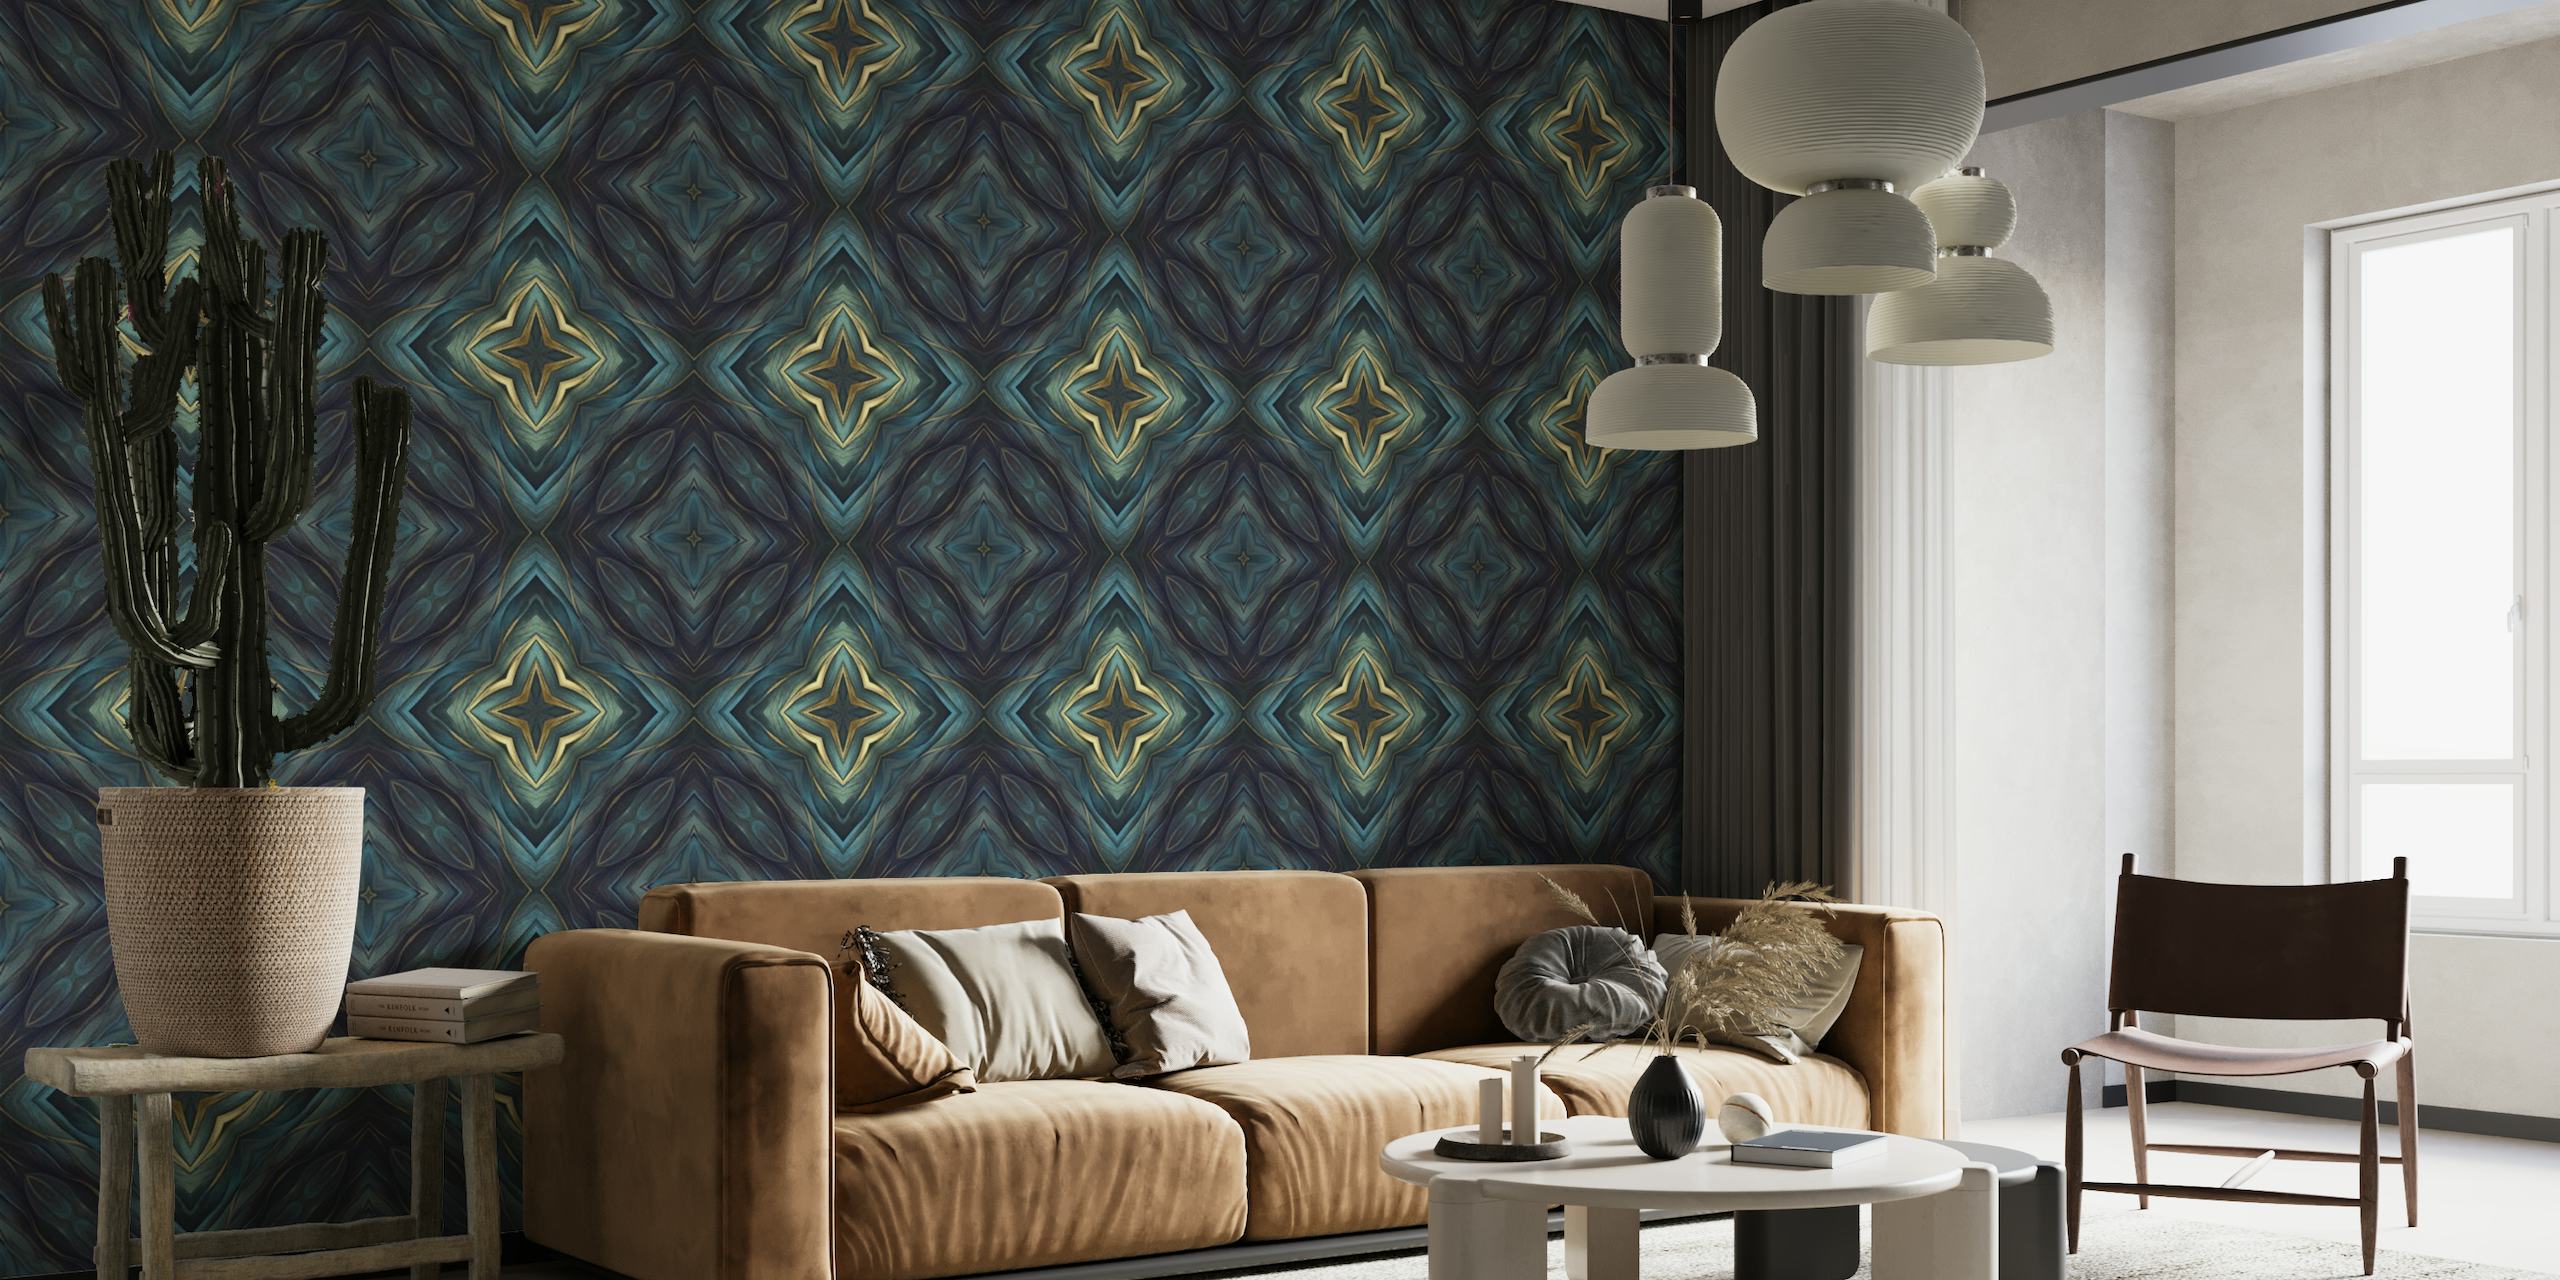 Artisanal Mediterranean Tile Design in blue and gold hues wall mural